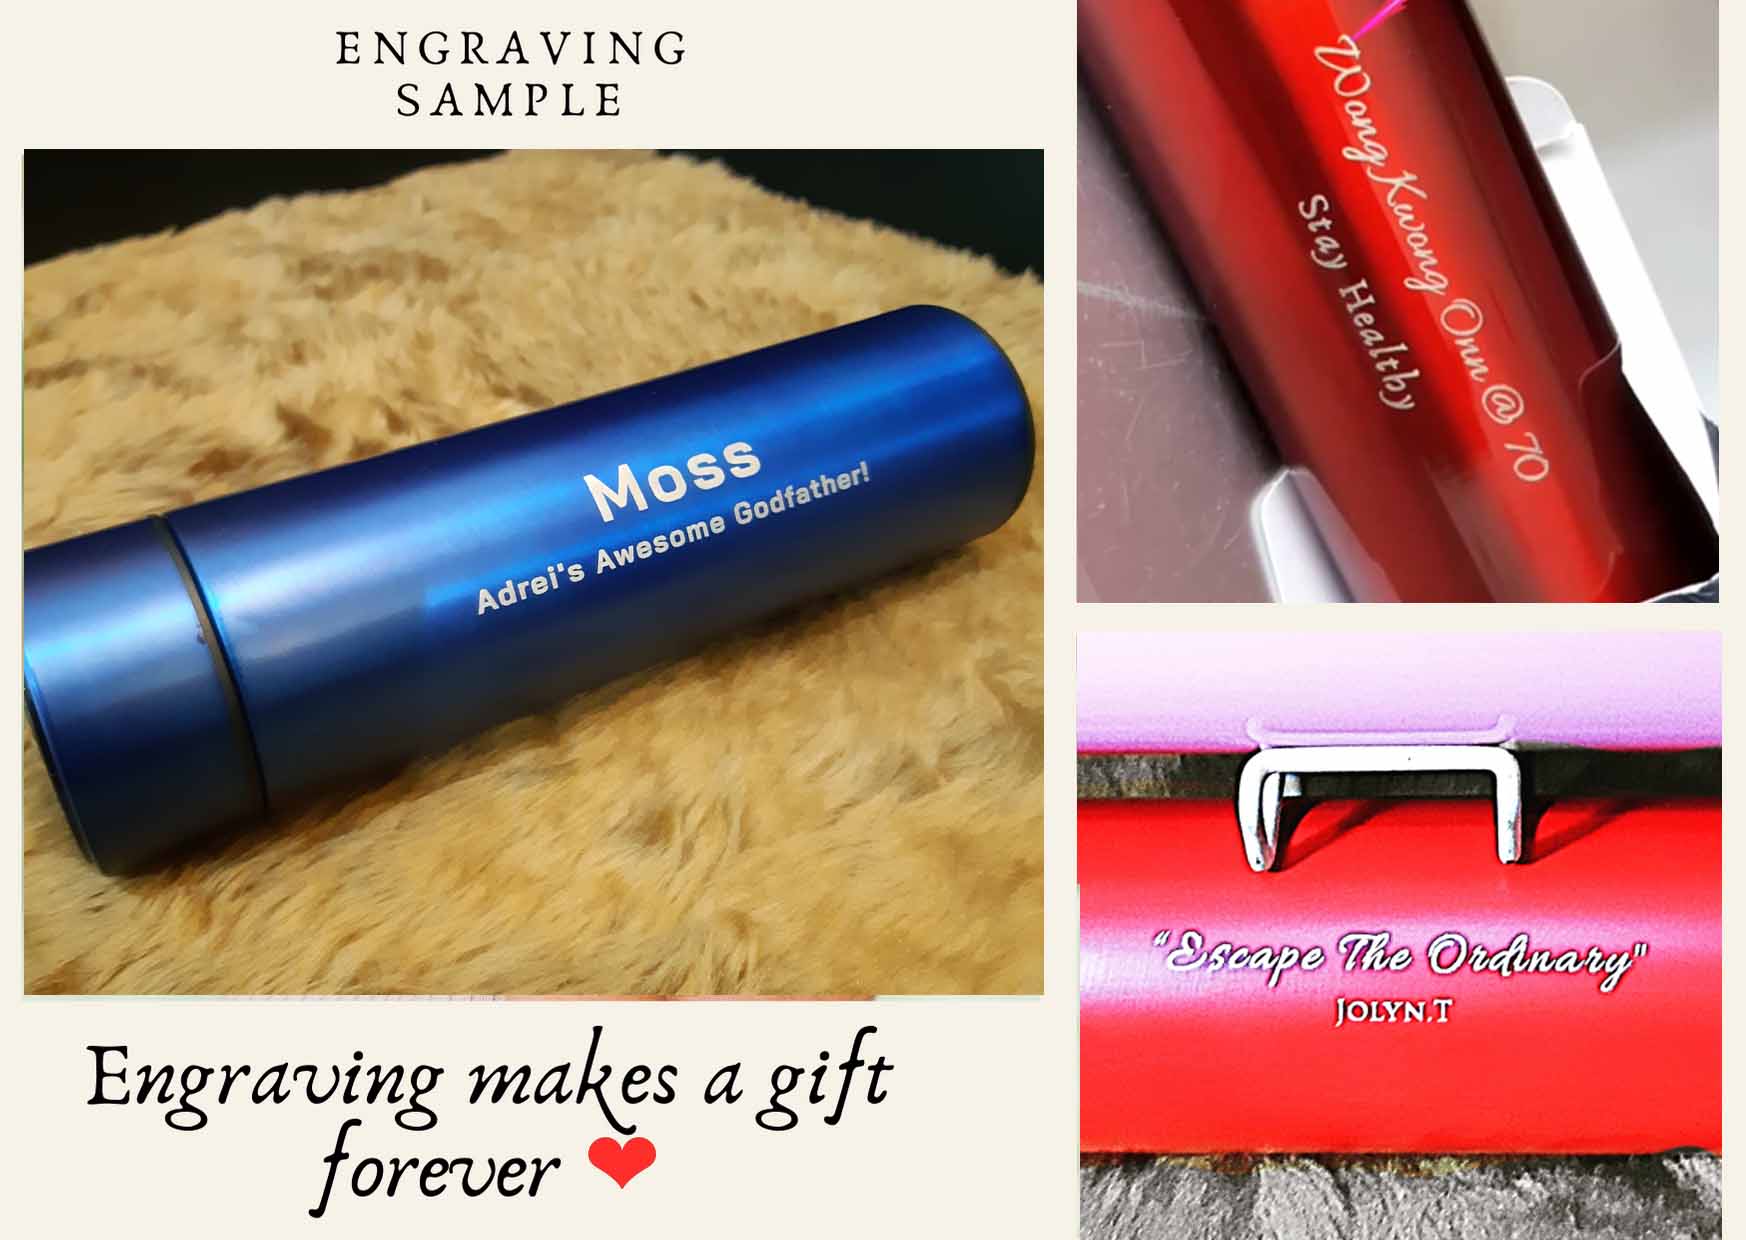 Thermos Engraving Sample by Wrap Smile.jpg